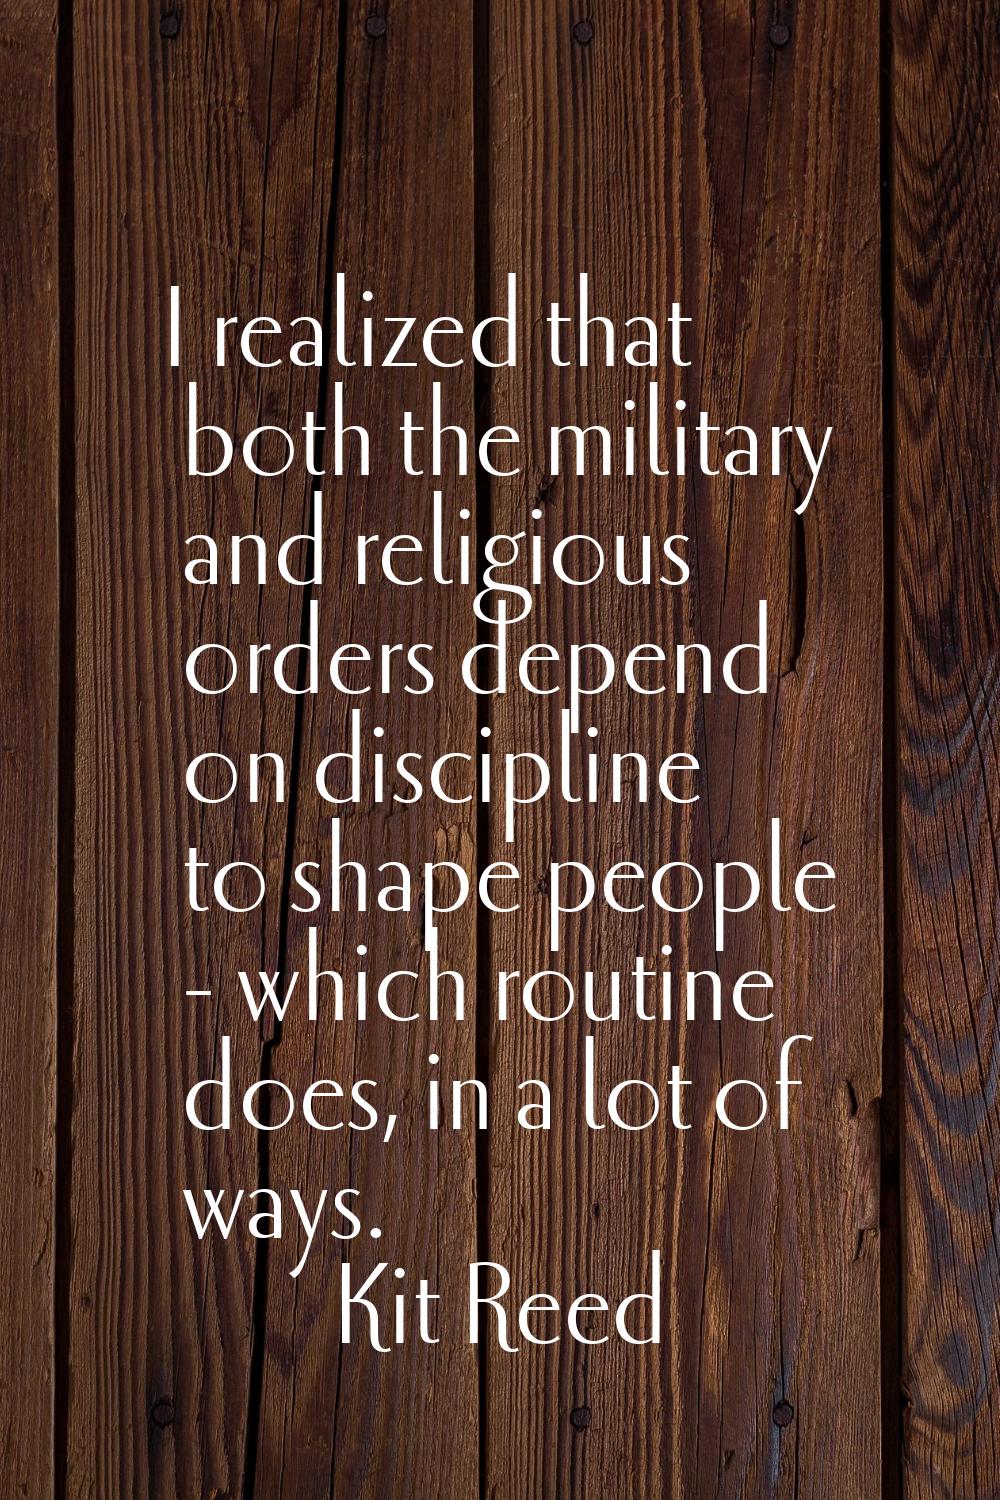 I realized that both the military and religious orders depend on discipline to shape people - which